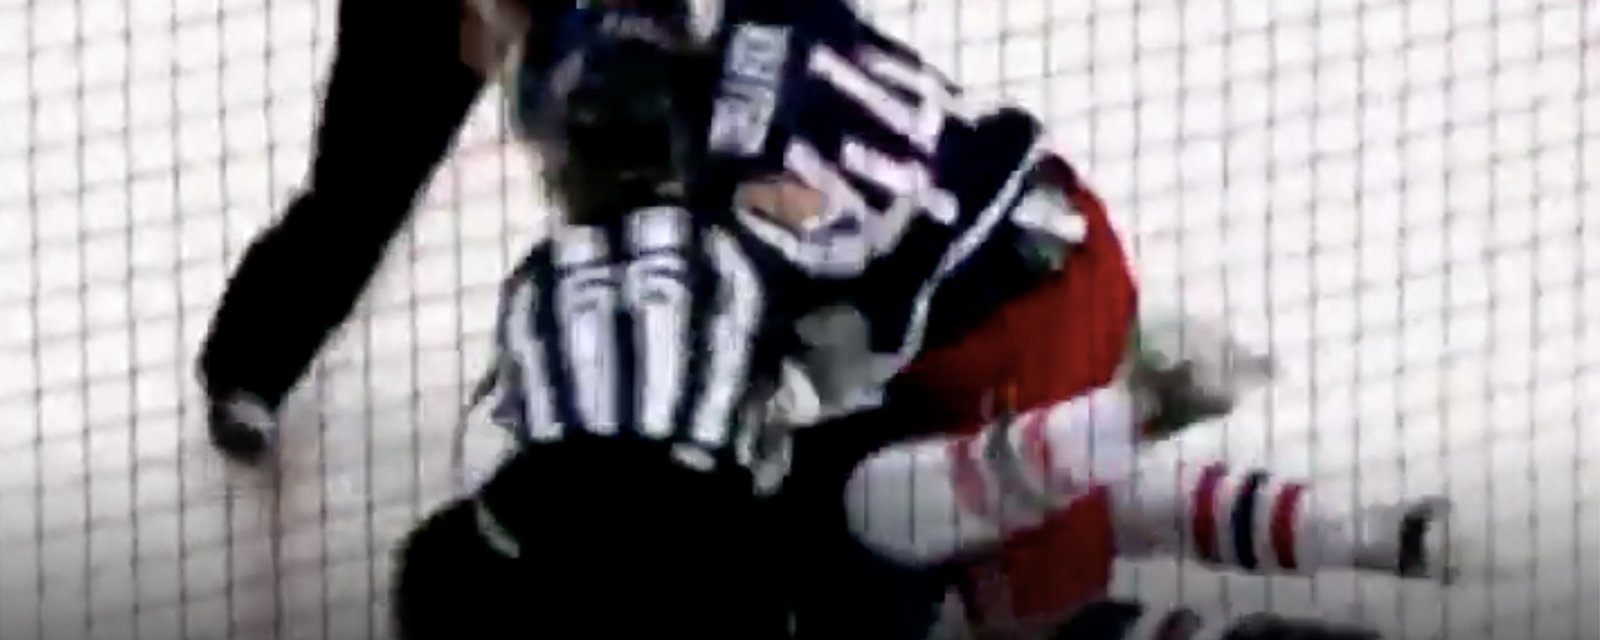 Selleck absolutely pummels Horvat, landing a vicious punch to the face as his opponent's head hits the ice